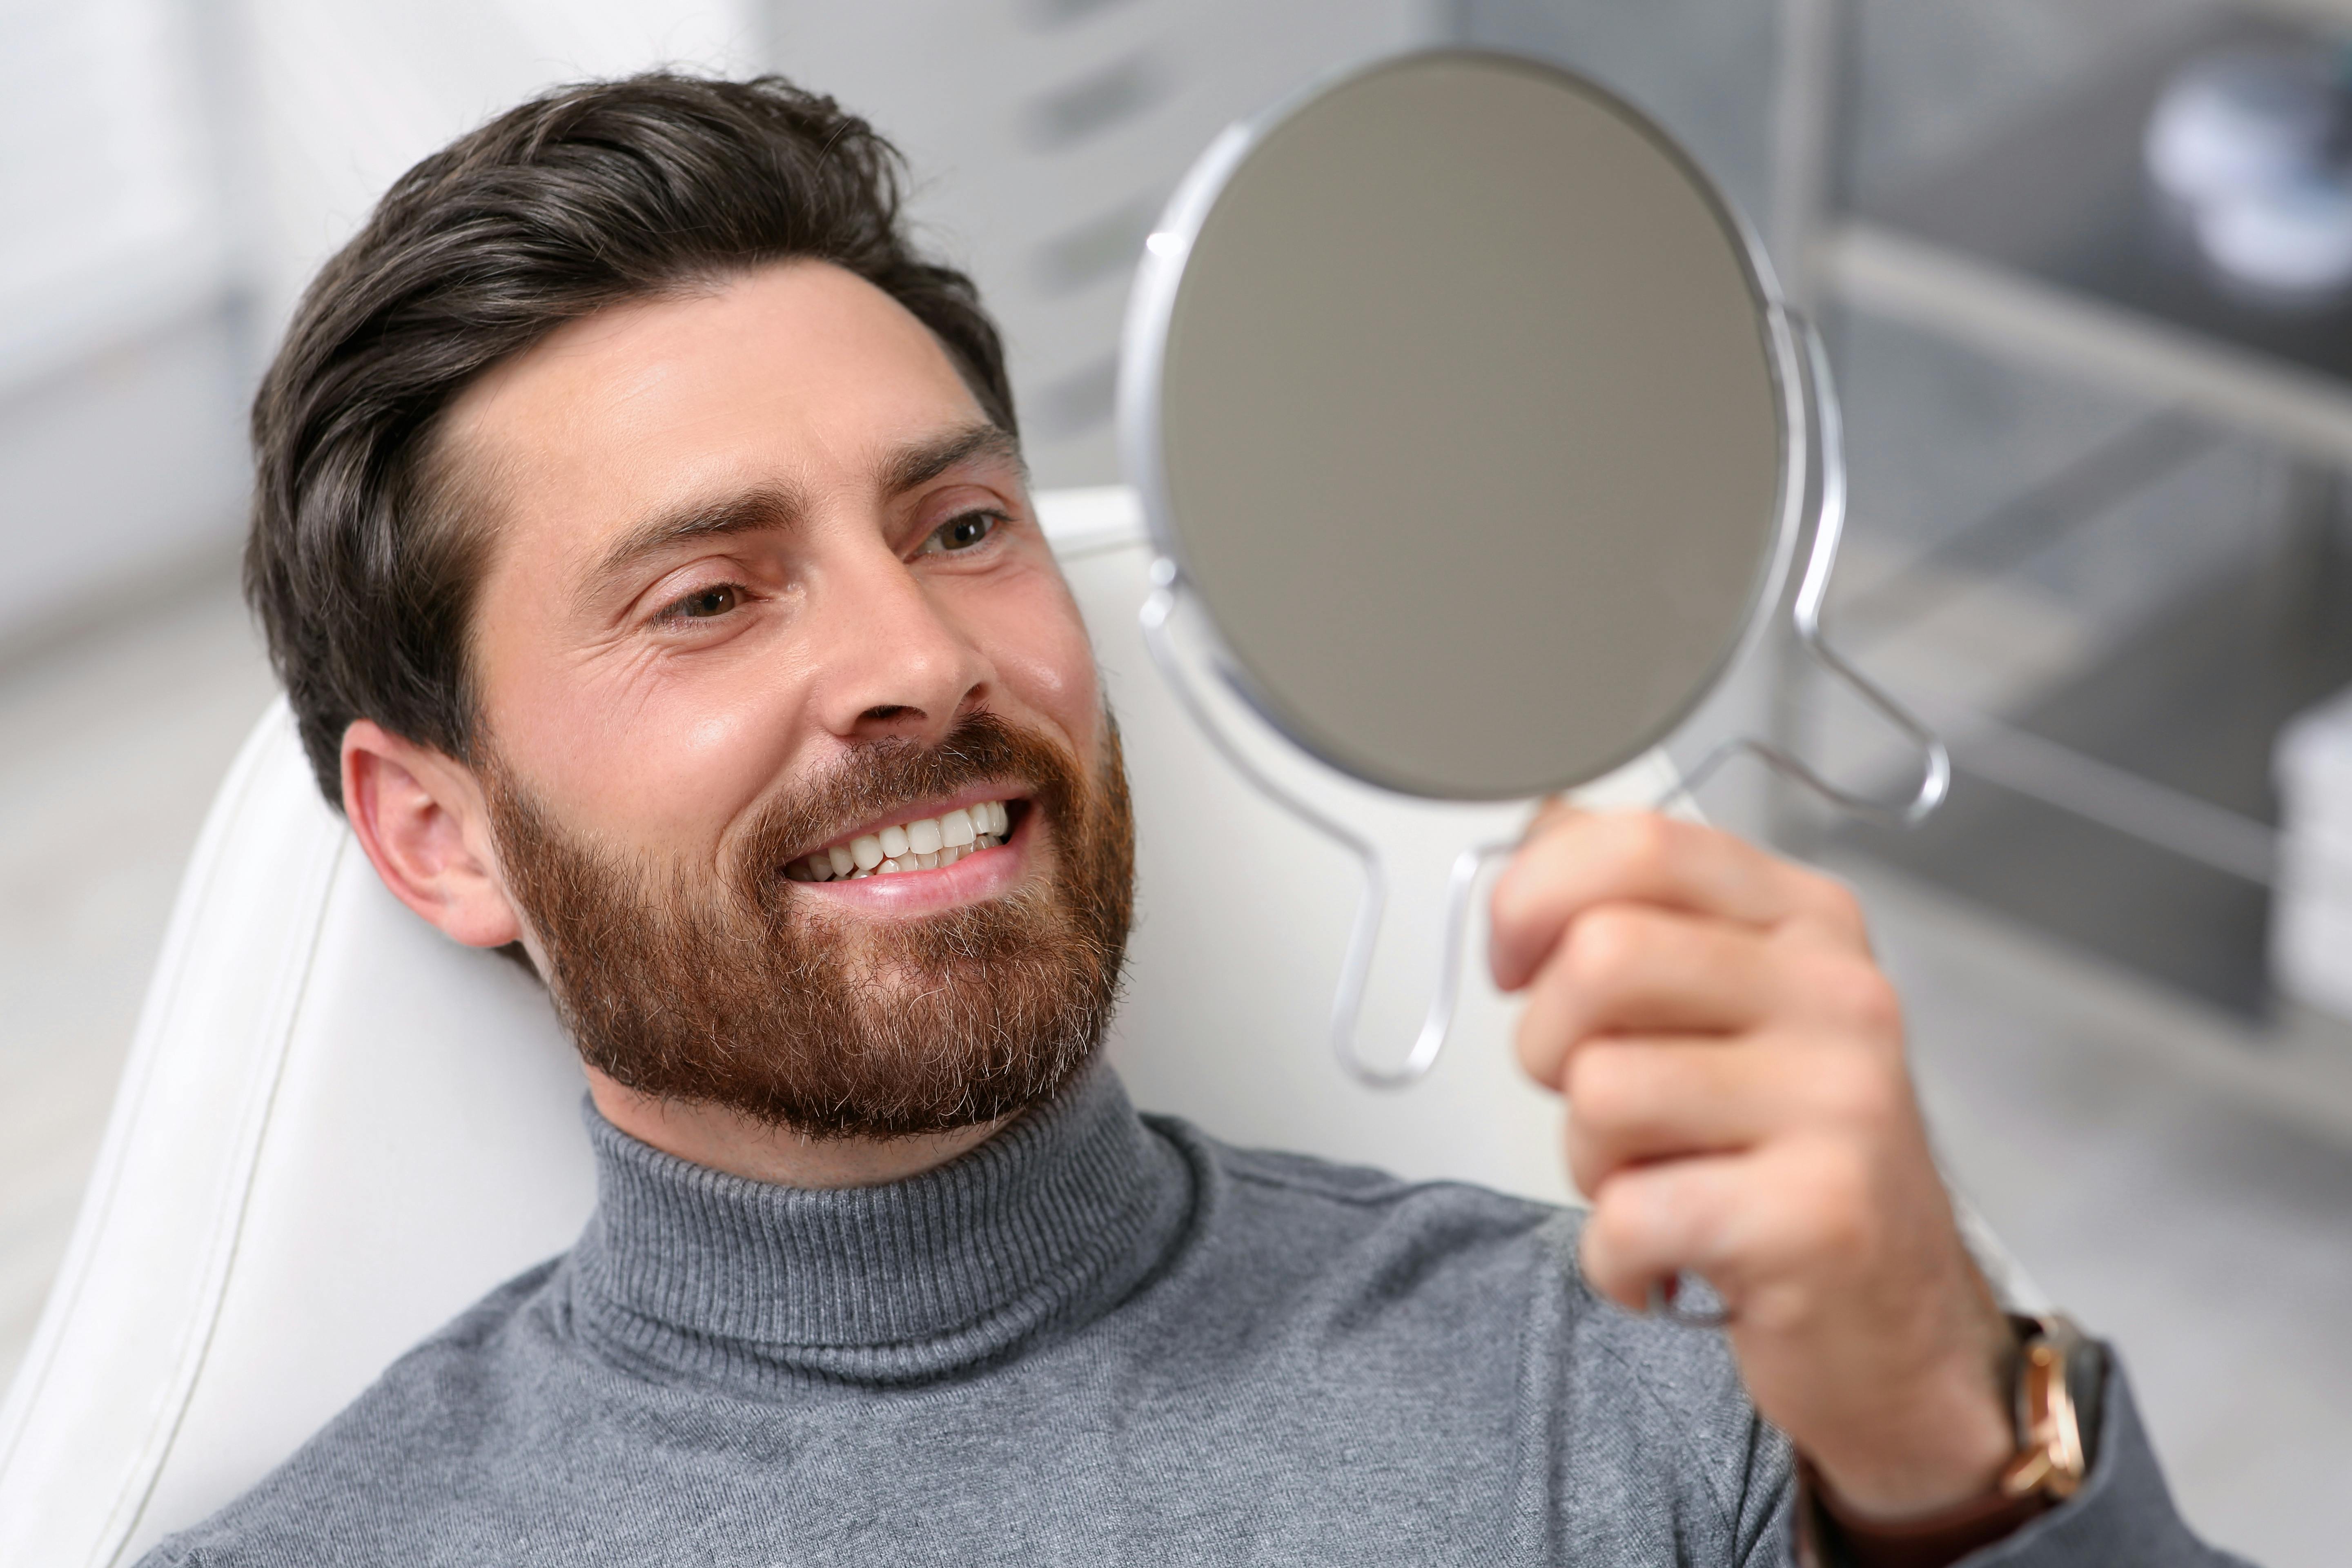 A person looking at their teeth in a mirror